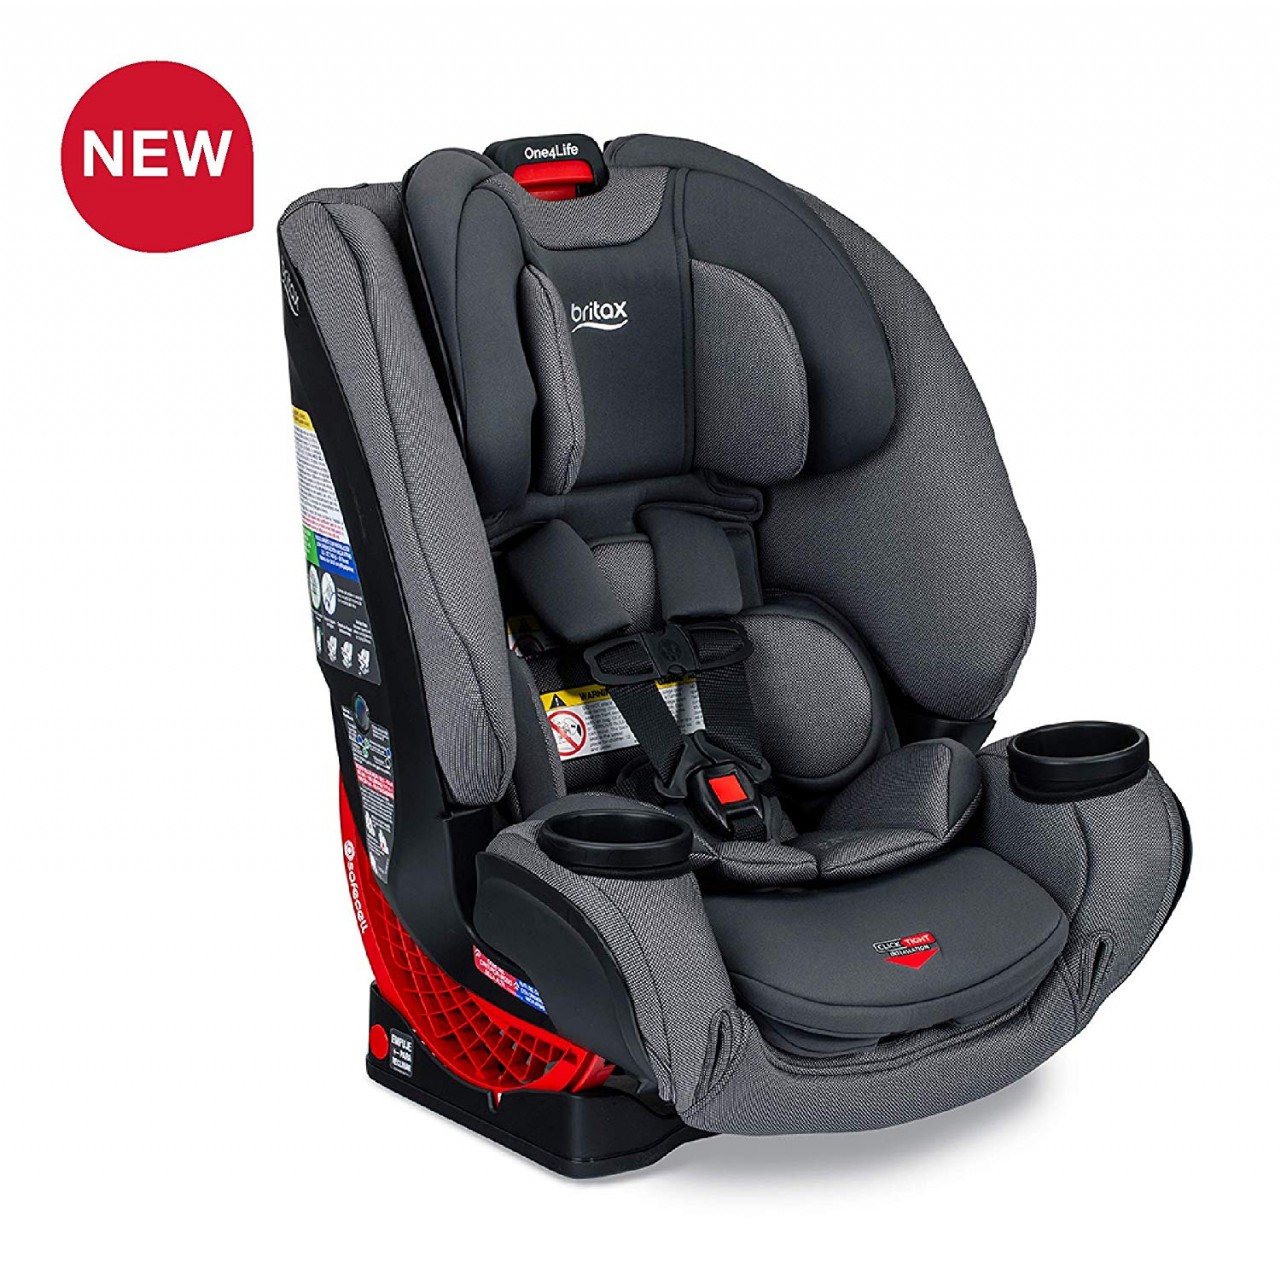 Britax One4Life ClickTight All-in-One Car Seat – 10 Years of Use – Infant, Convertible, Booster – 5